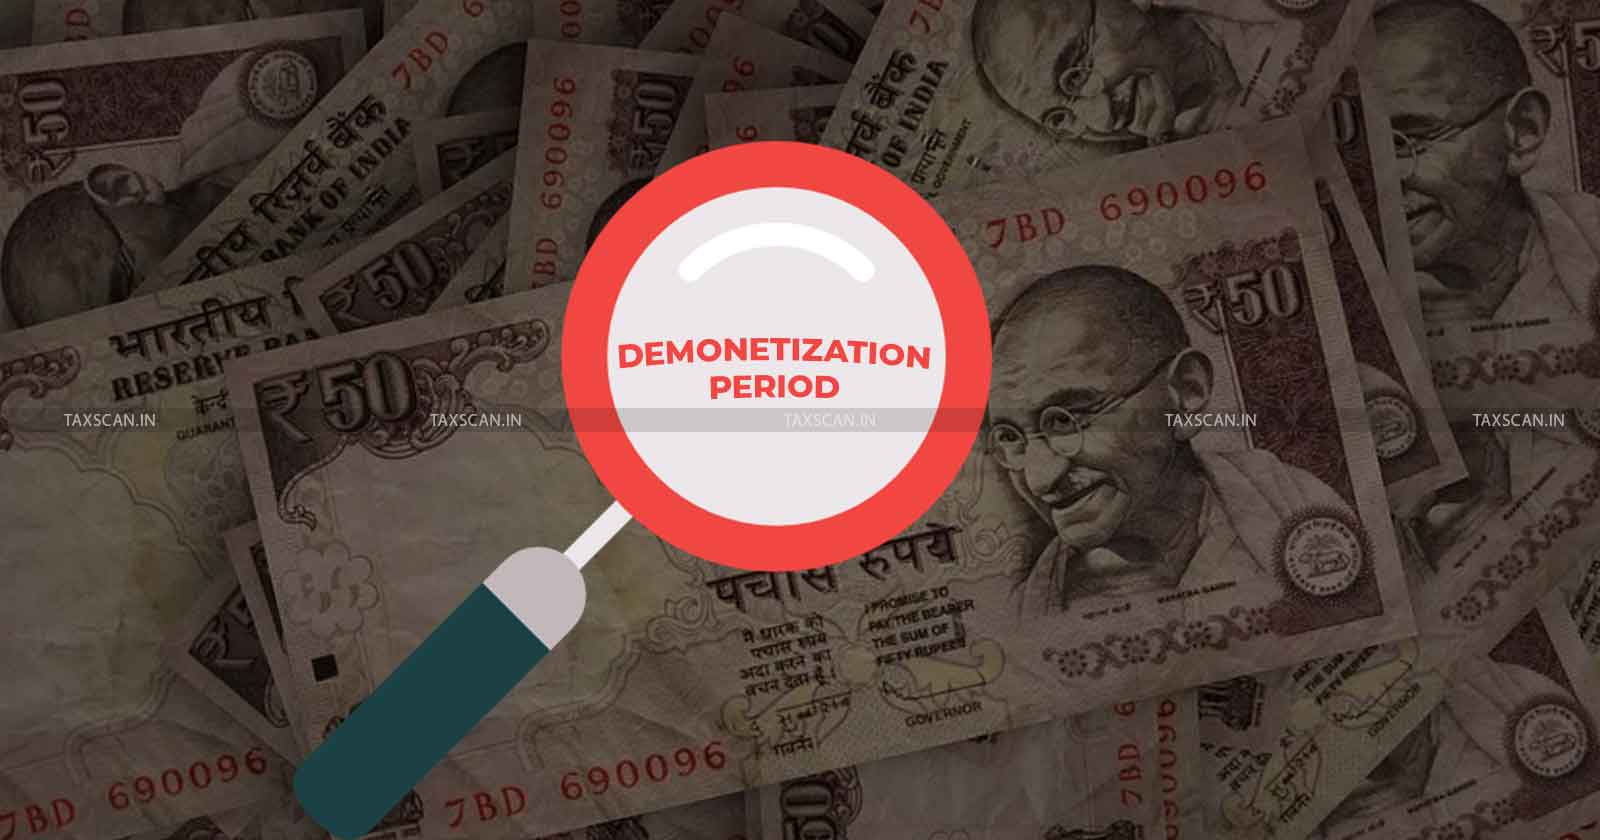 ITAT - Demonetization - Unexplained Income - Deposit Made as a Reserve Amount for Business - taxscan